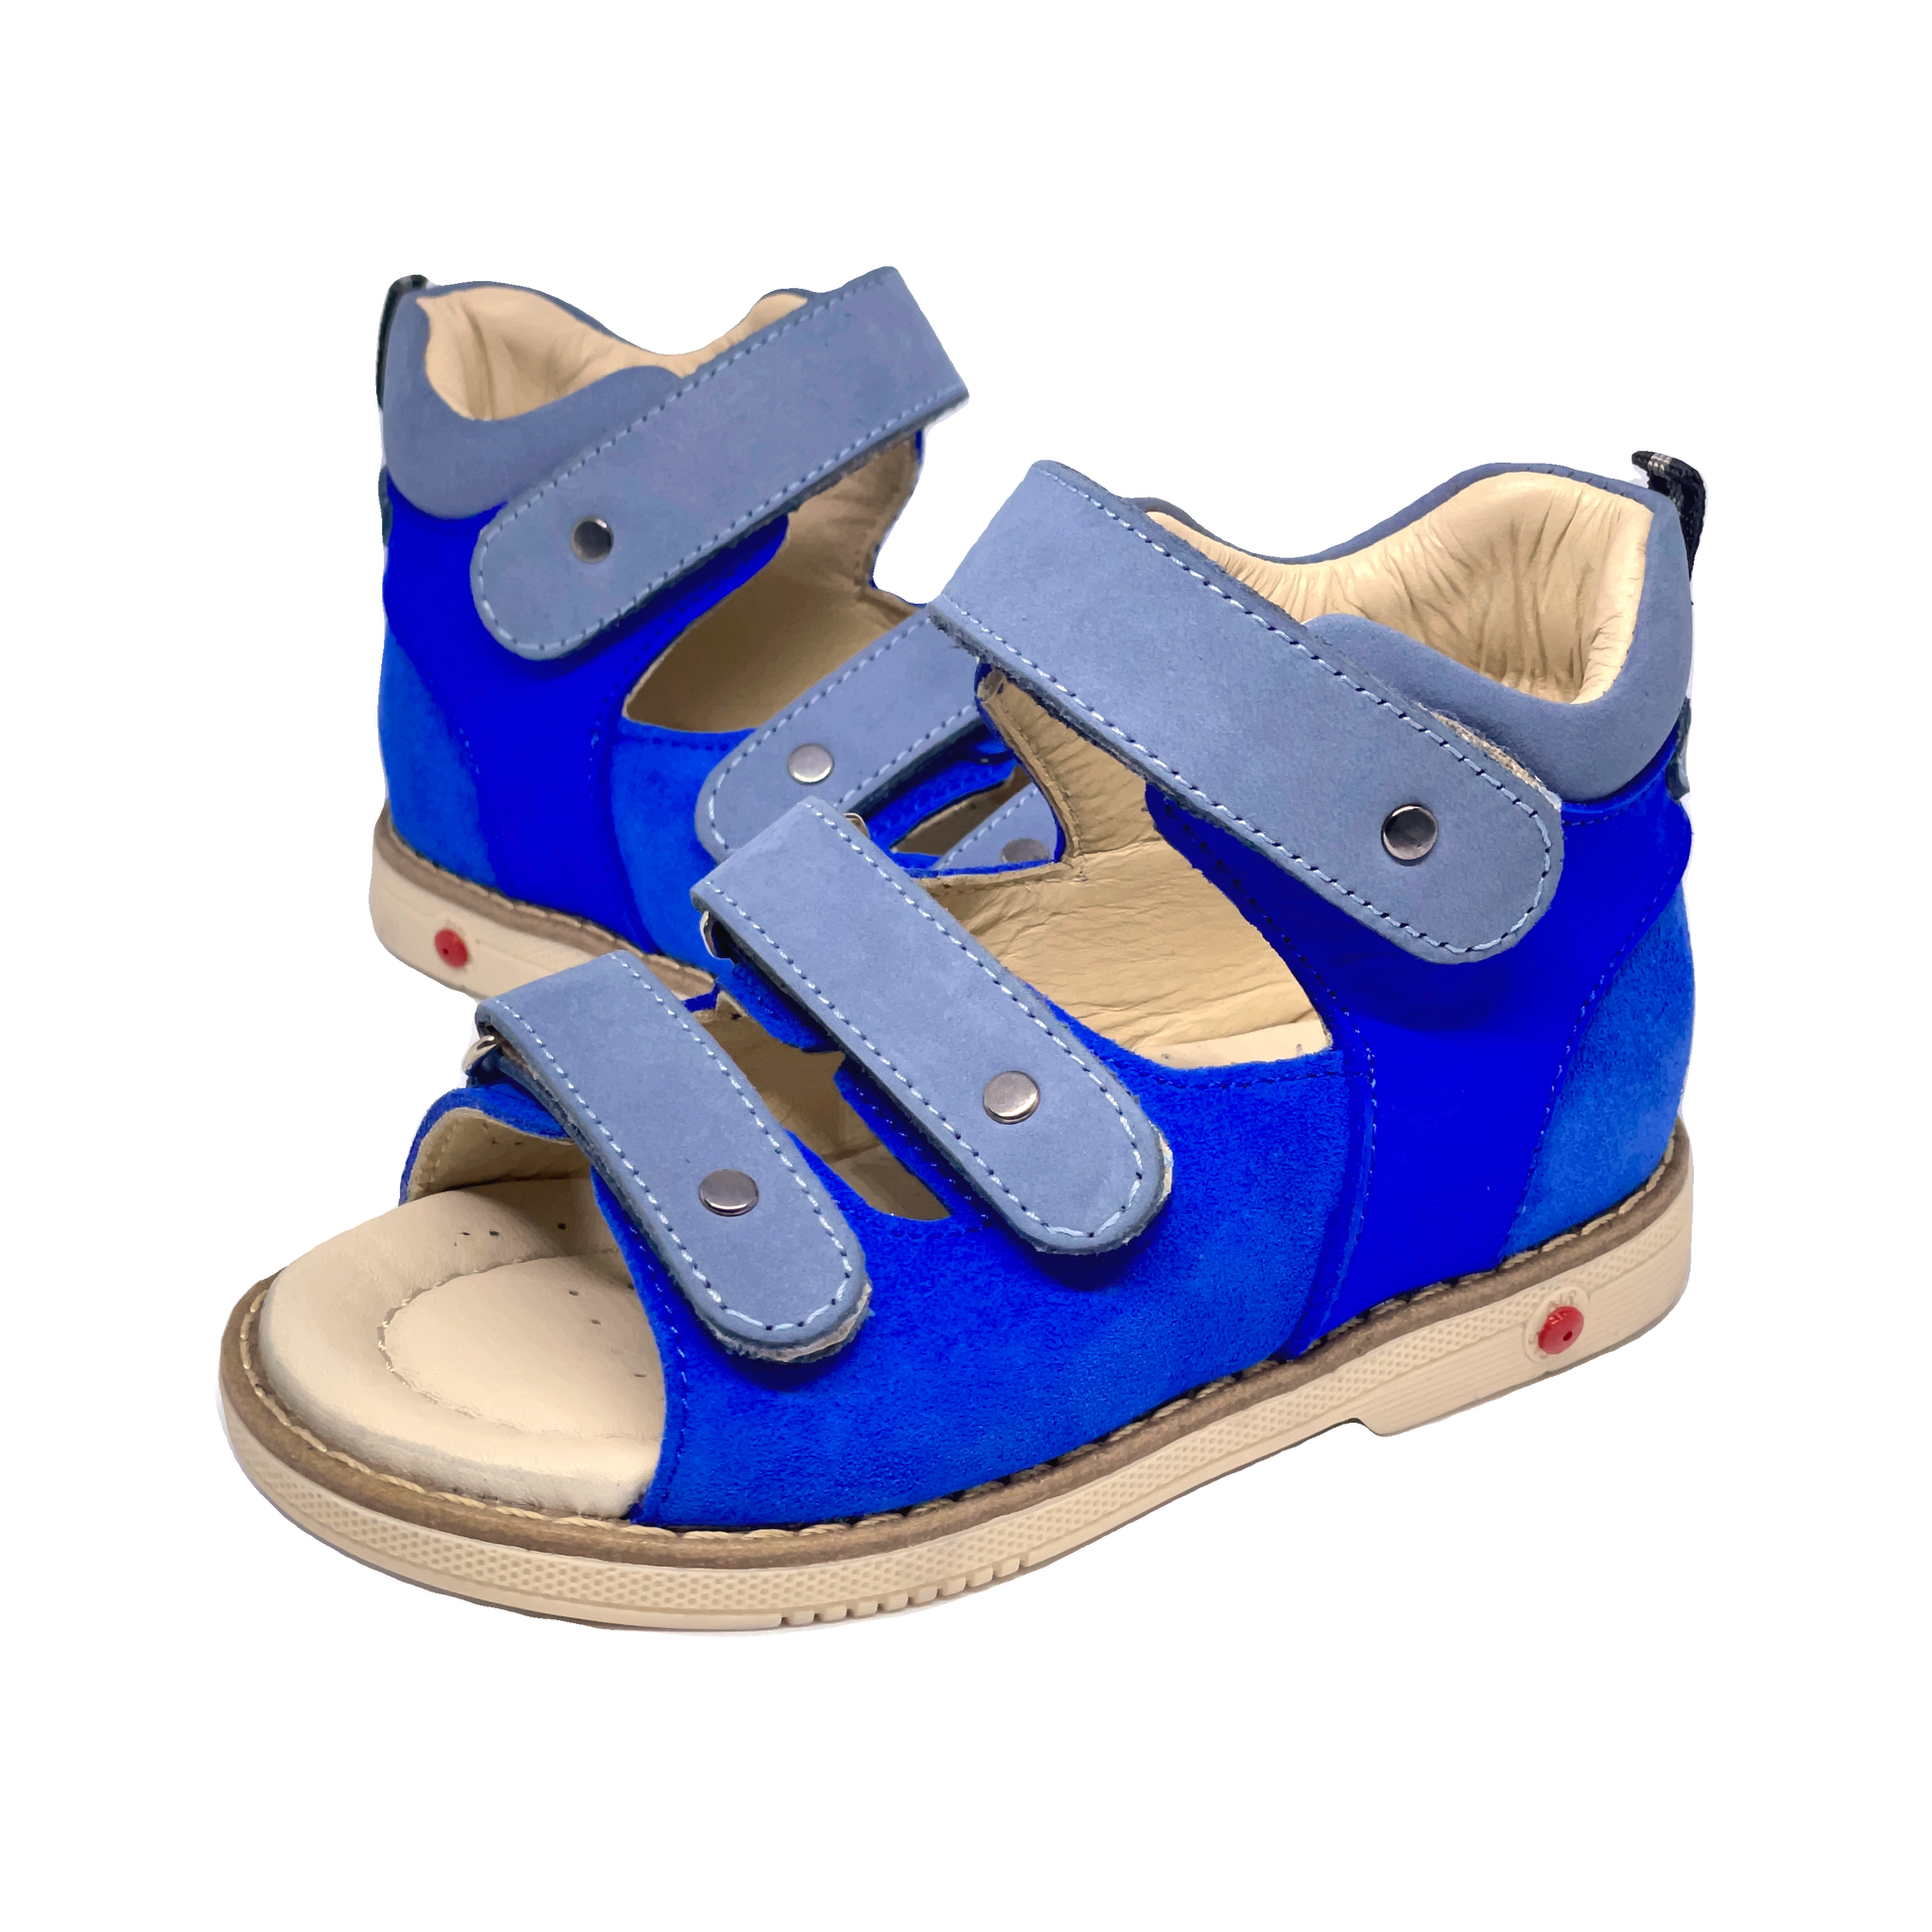 Photo of orthopedic kids sandals in deep blue with grey straps, designed with Thomas heels, arch support, and ankle stability for utmost comfort and support.